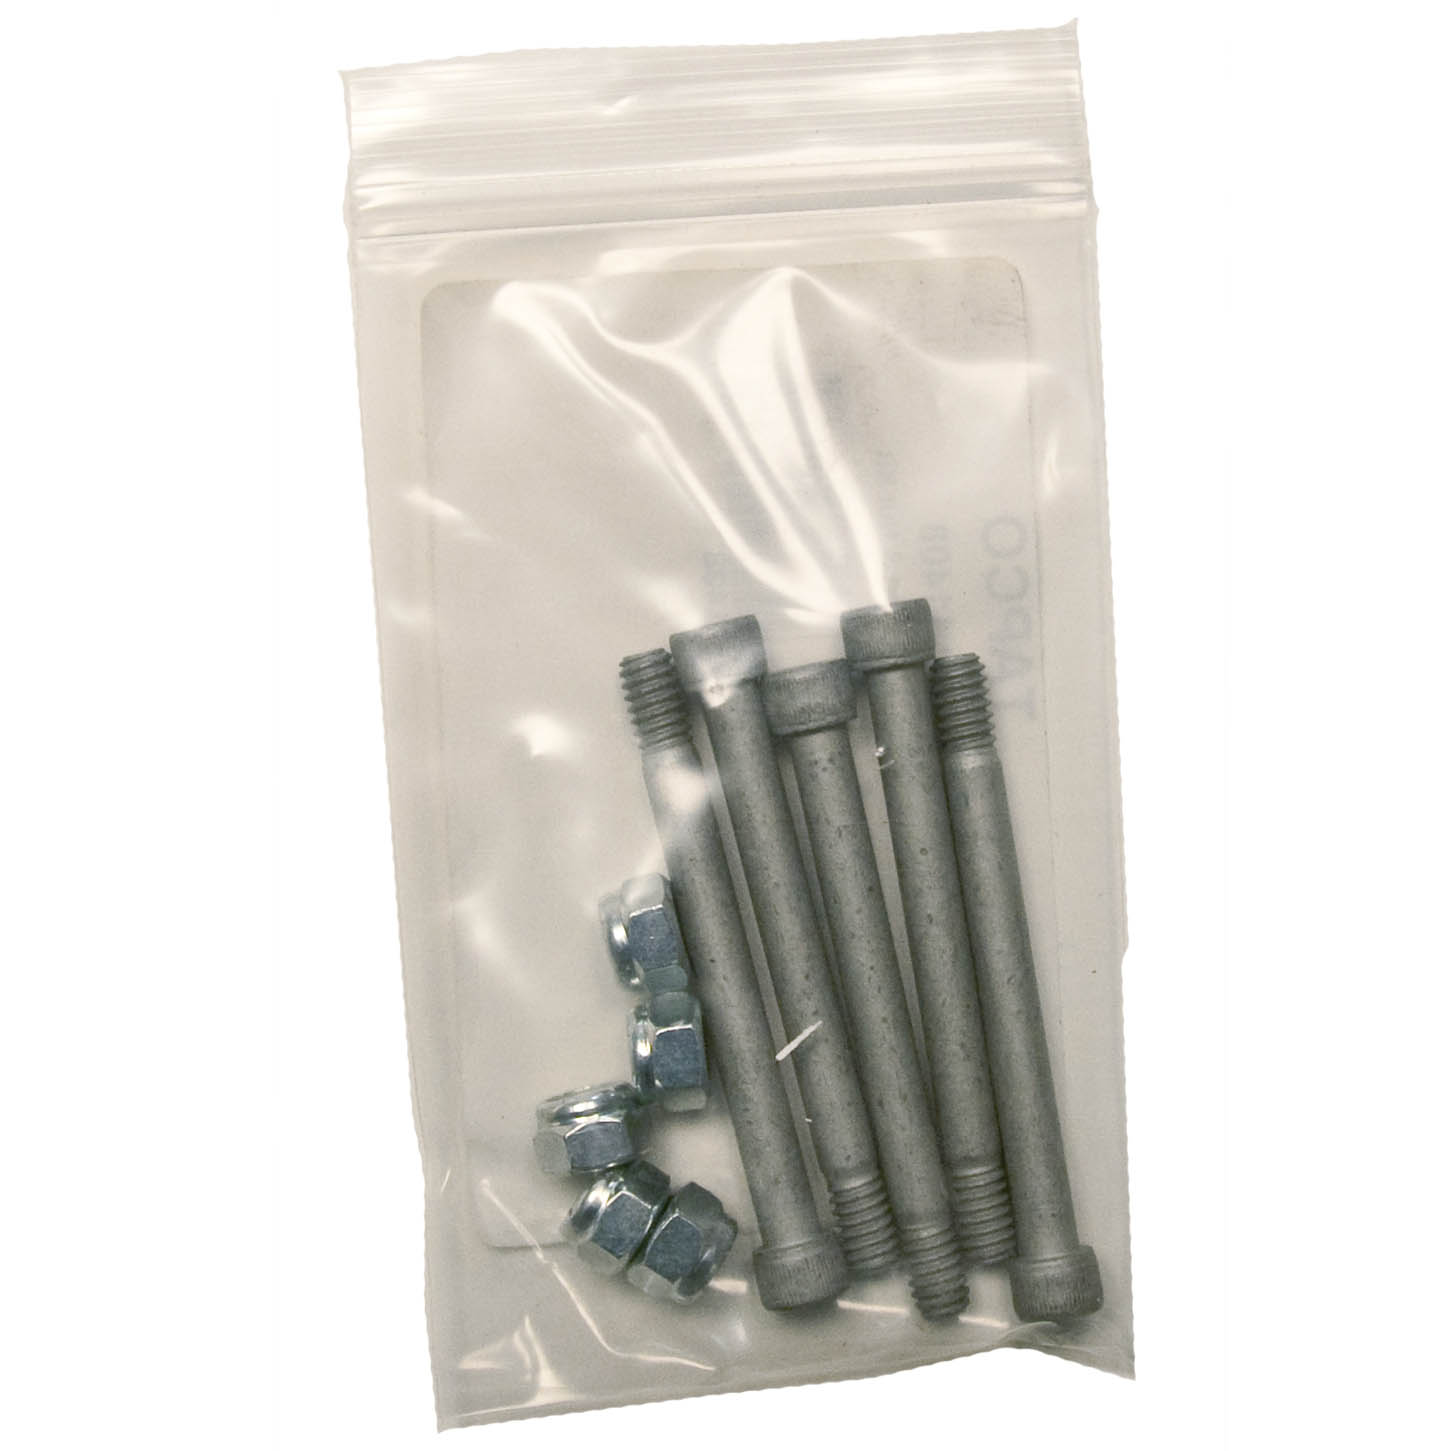 11408 - Bolt and Nut Kit